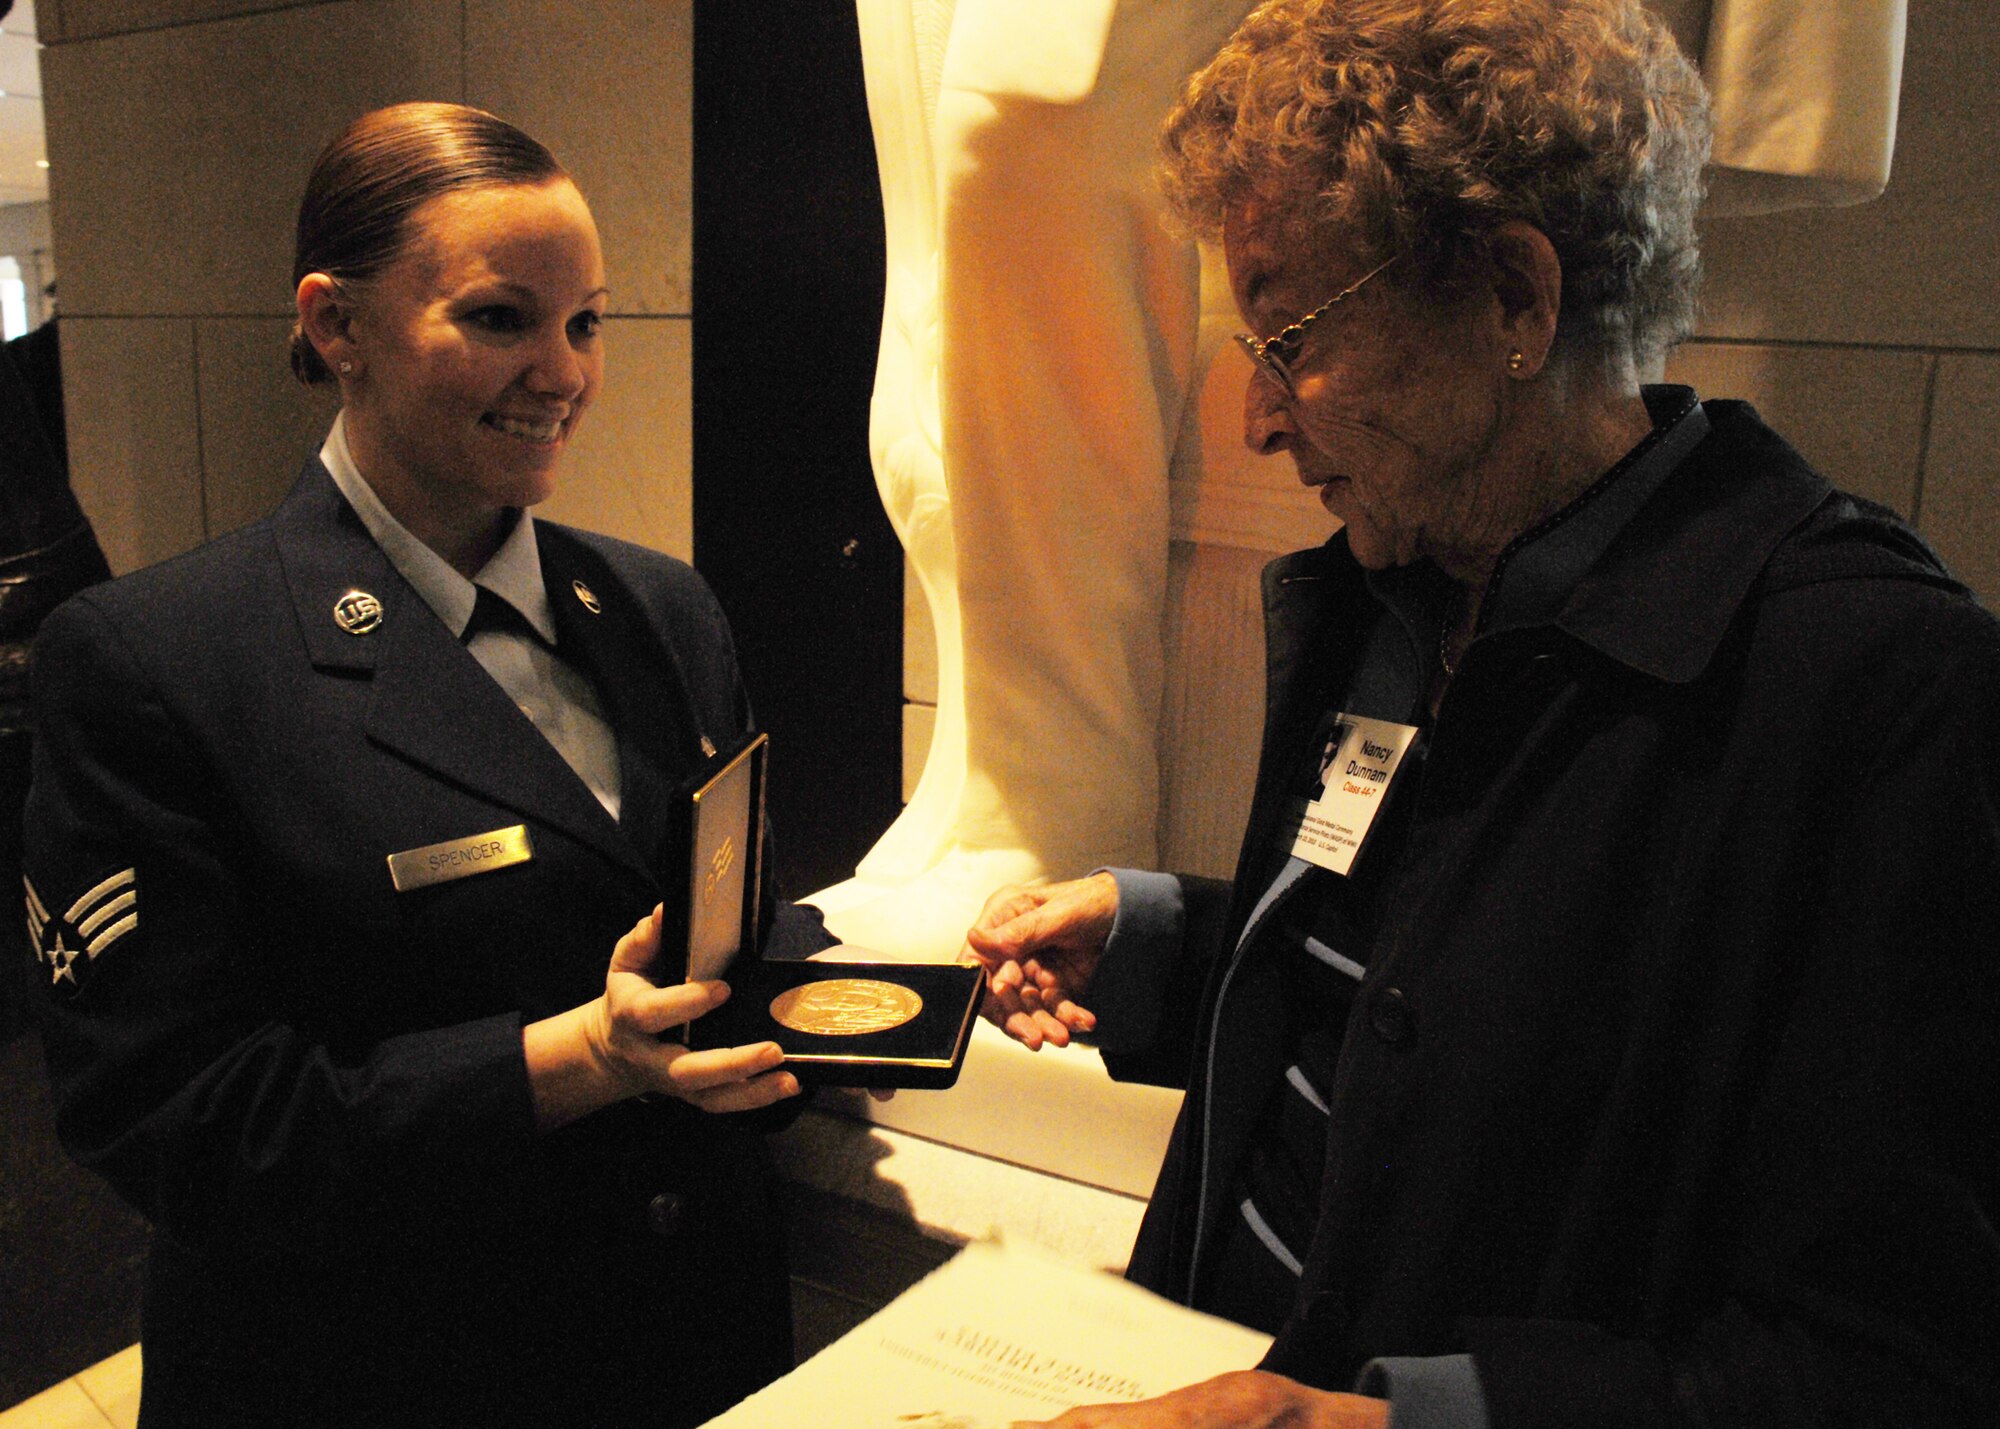 Senior Airman Katie Spencer, 316th Wing public affairs specialist, left, presents Nancy Dunnham, World War II Woman Airforce Service Pilot, with a bronze replica of the Congressional Gold Medal in a private ceremony at the Capitol building visitor center March 10, 2010. Ms. Dunnham is from Bellevue, Wash., and served as part of the “Caterpillar Club,” a skydive team that jumped from simulated burning and damaged aircraft. 
A number of Joint Team Andrews Airmen volunteered to escort the WASP and assisted them and their families during the day. (U.S. Air Force photo by Airman 1st Class Kat Lynn Justen)